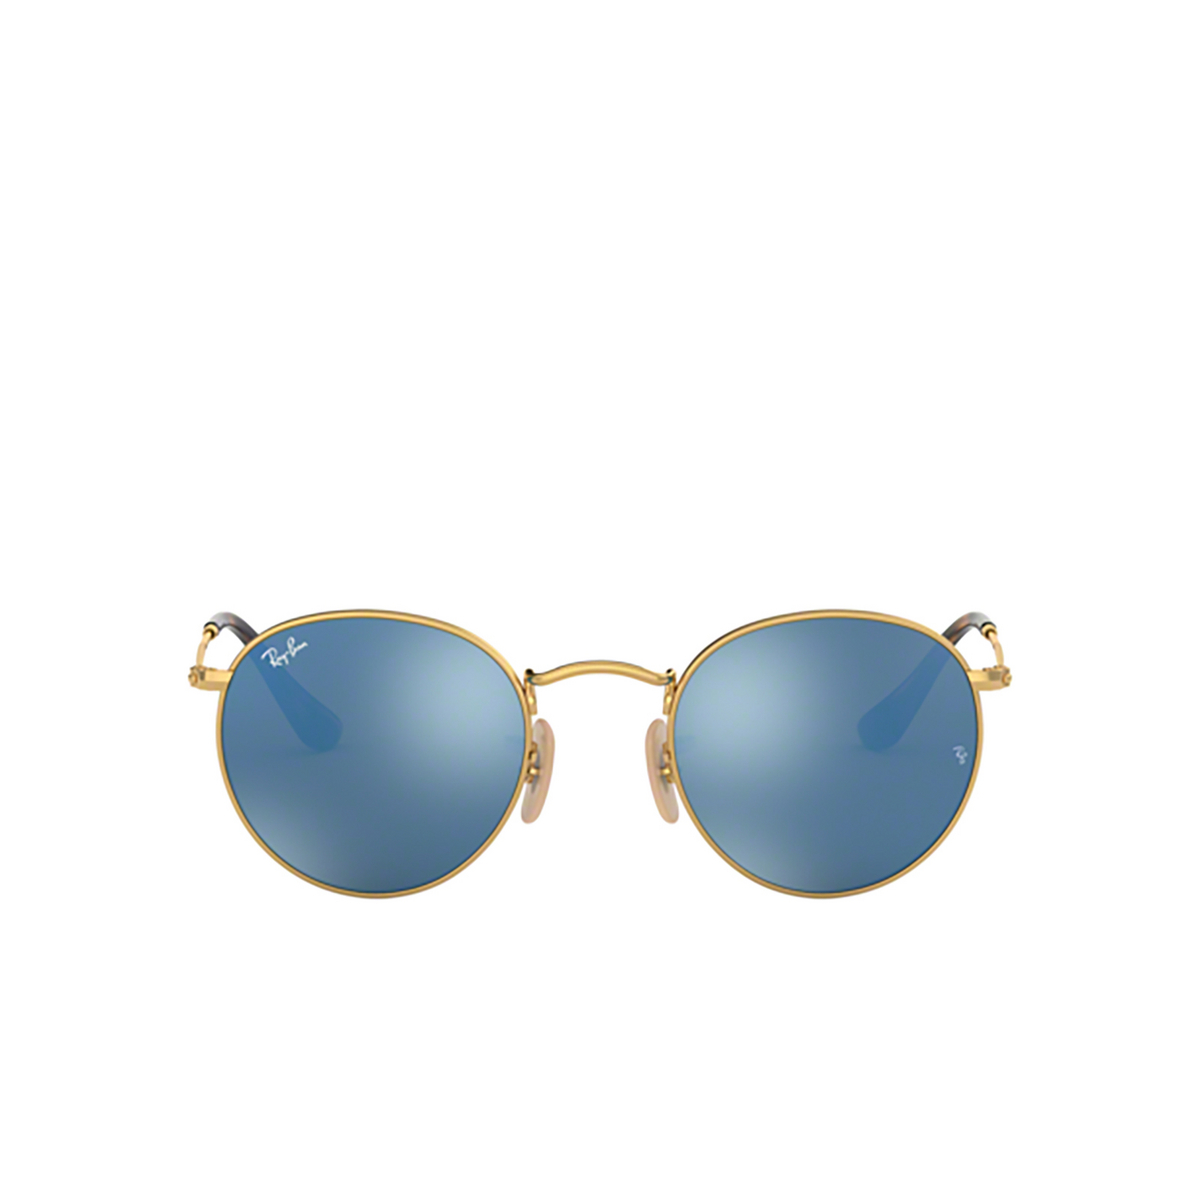 Ray-Ban ROUND METAL Sunglasses 001/9O ARISTA - front view